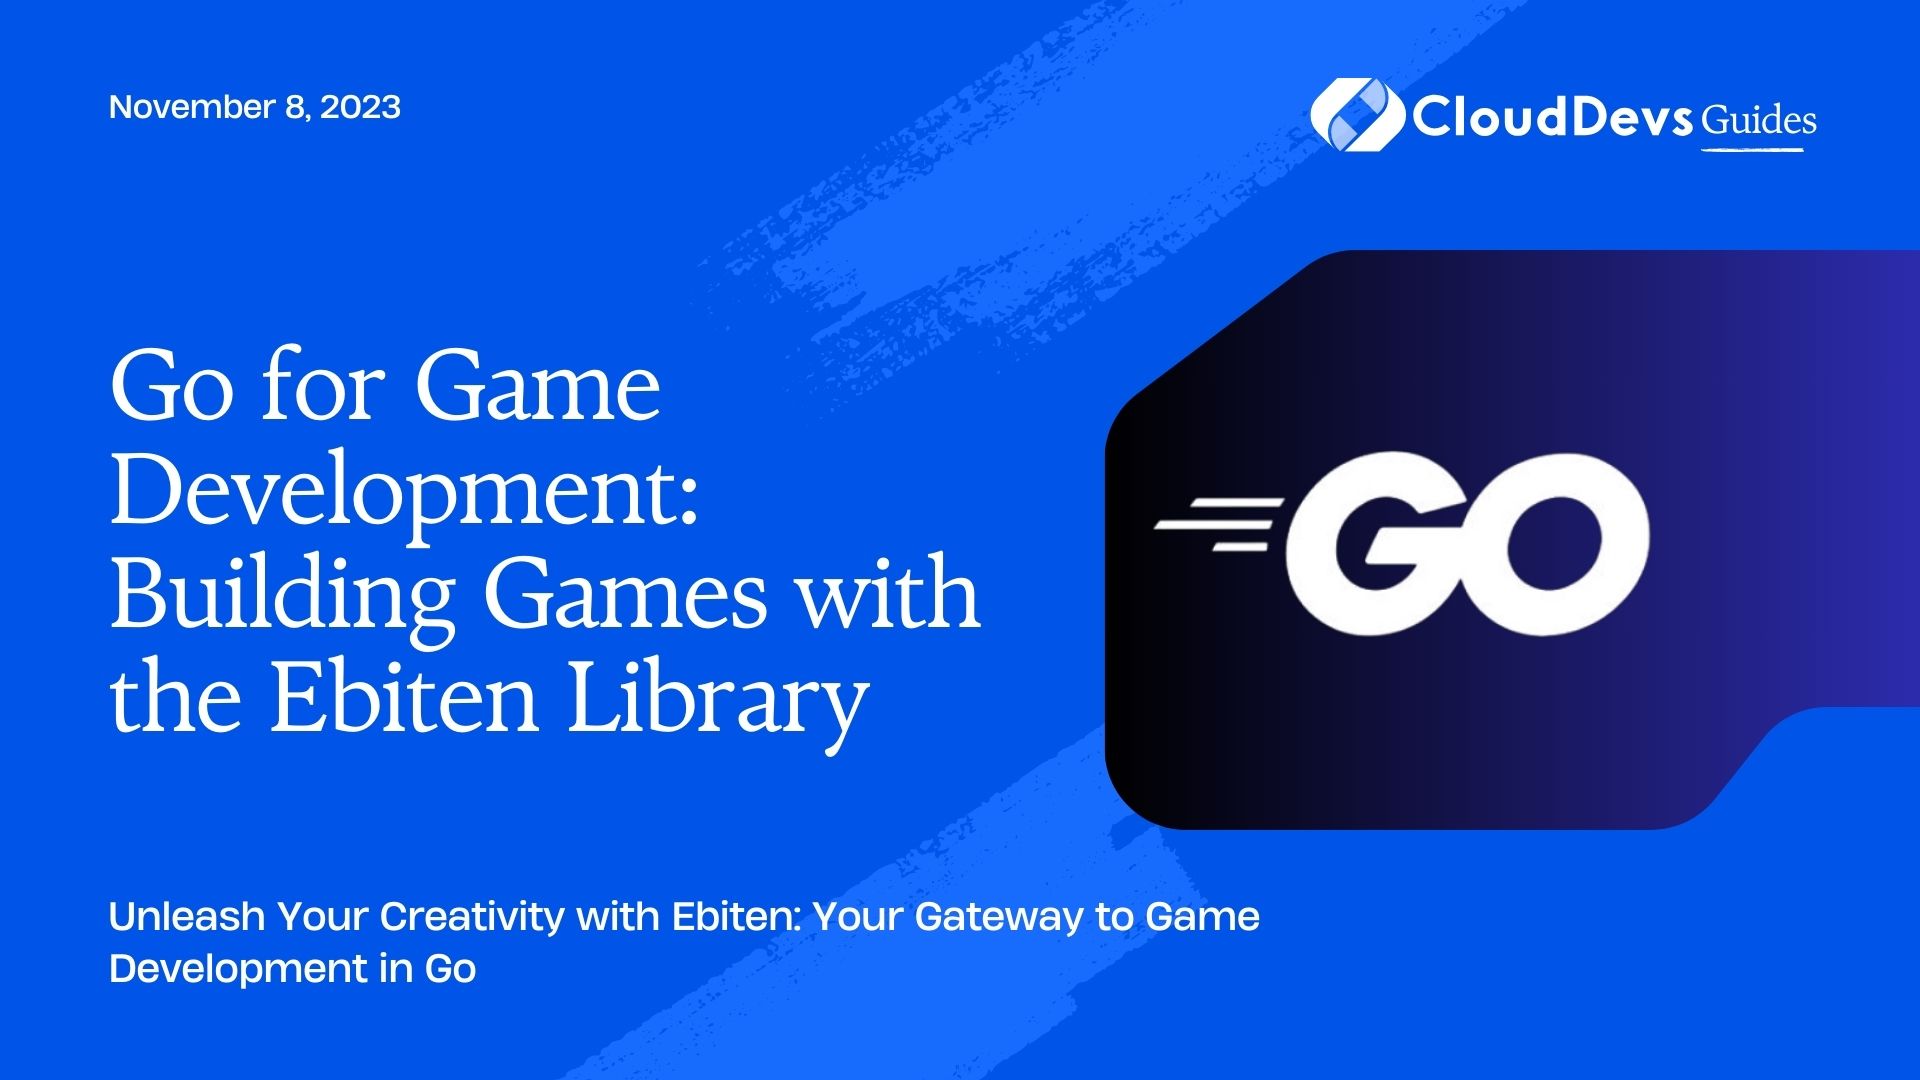 Go for Game Development: Building Games with the Ebiten Library